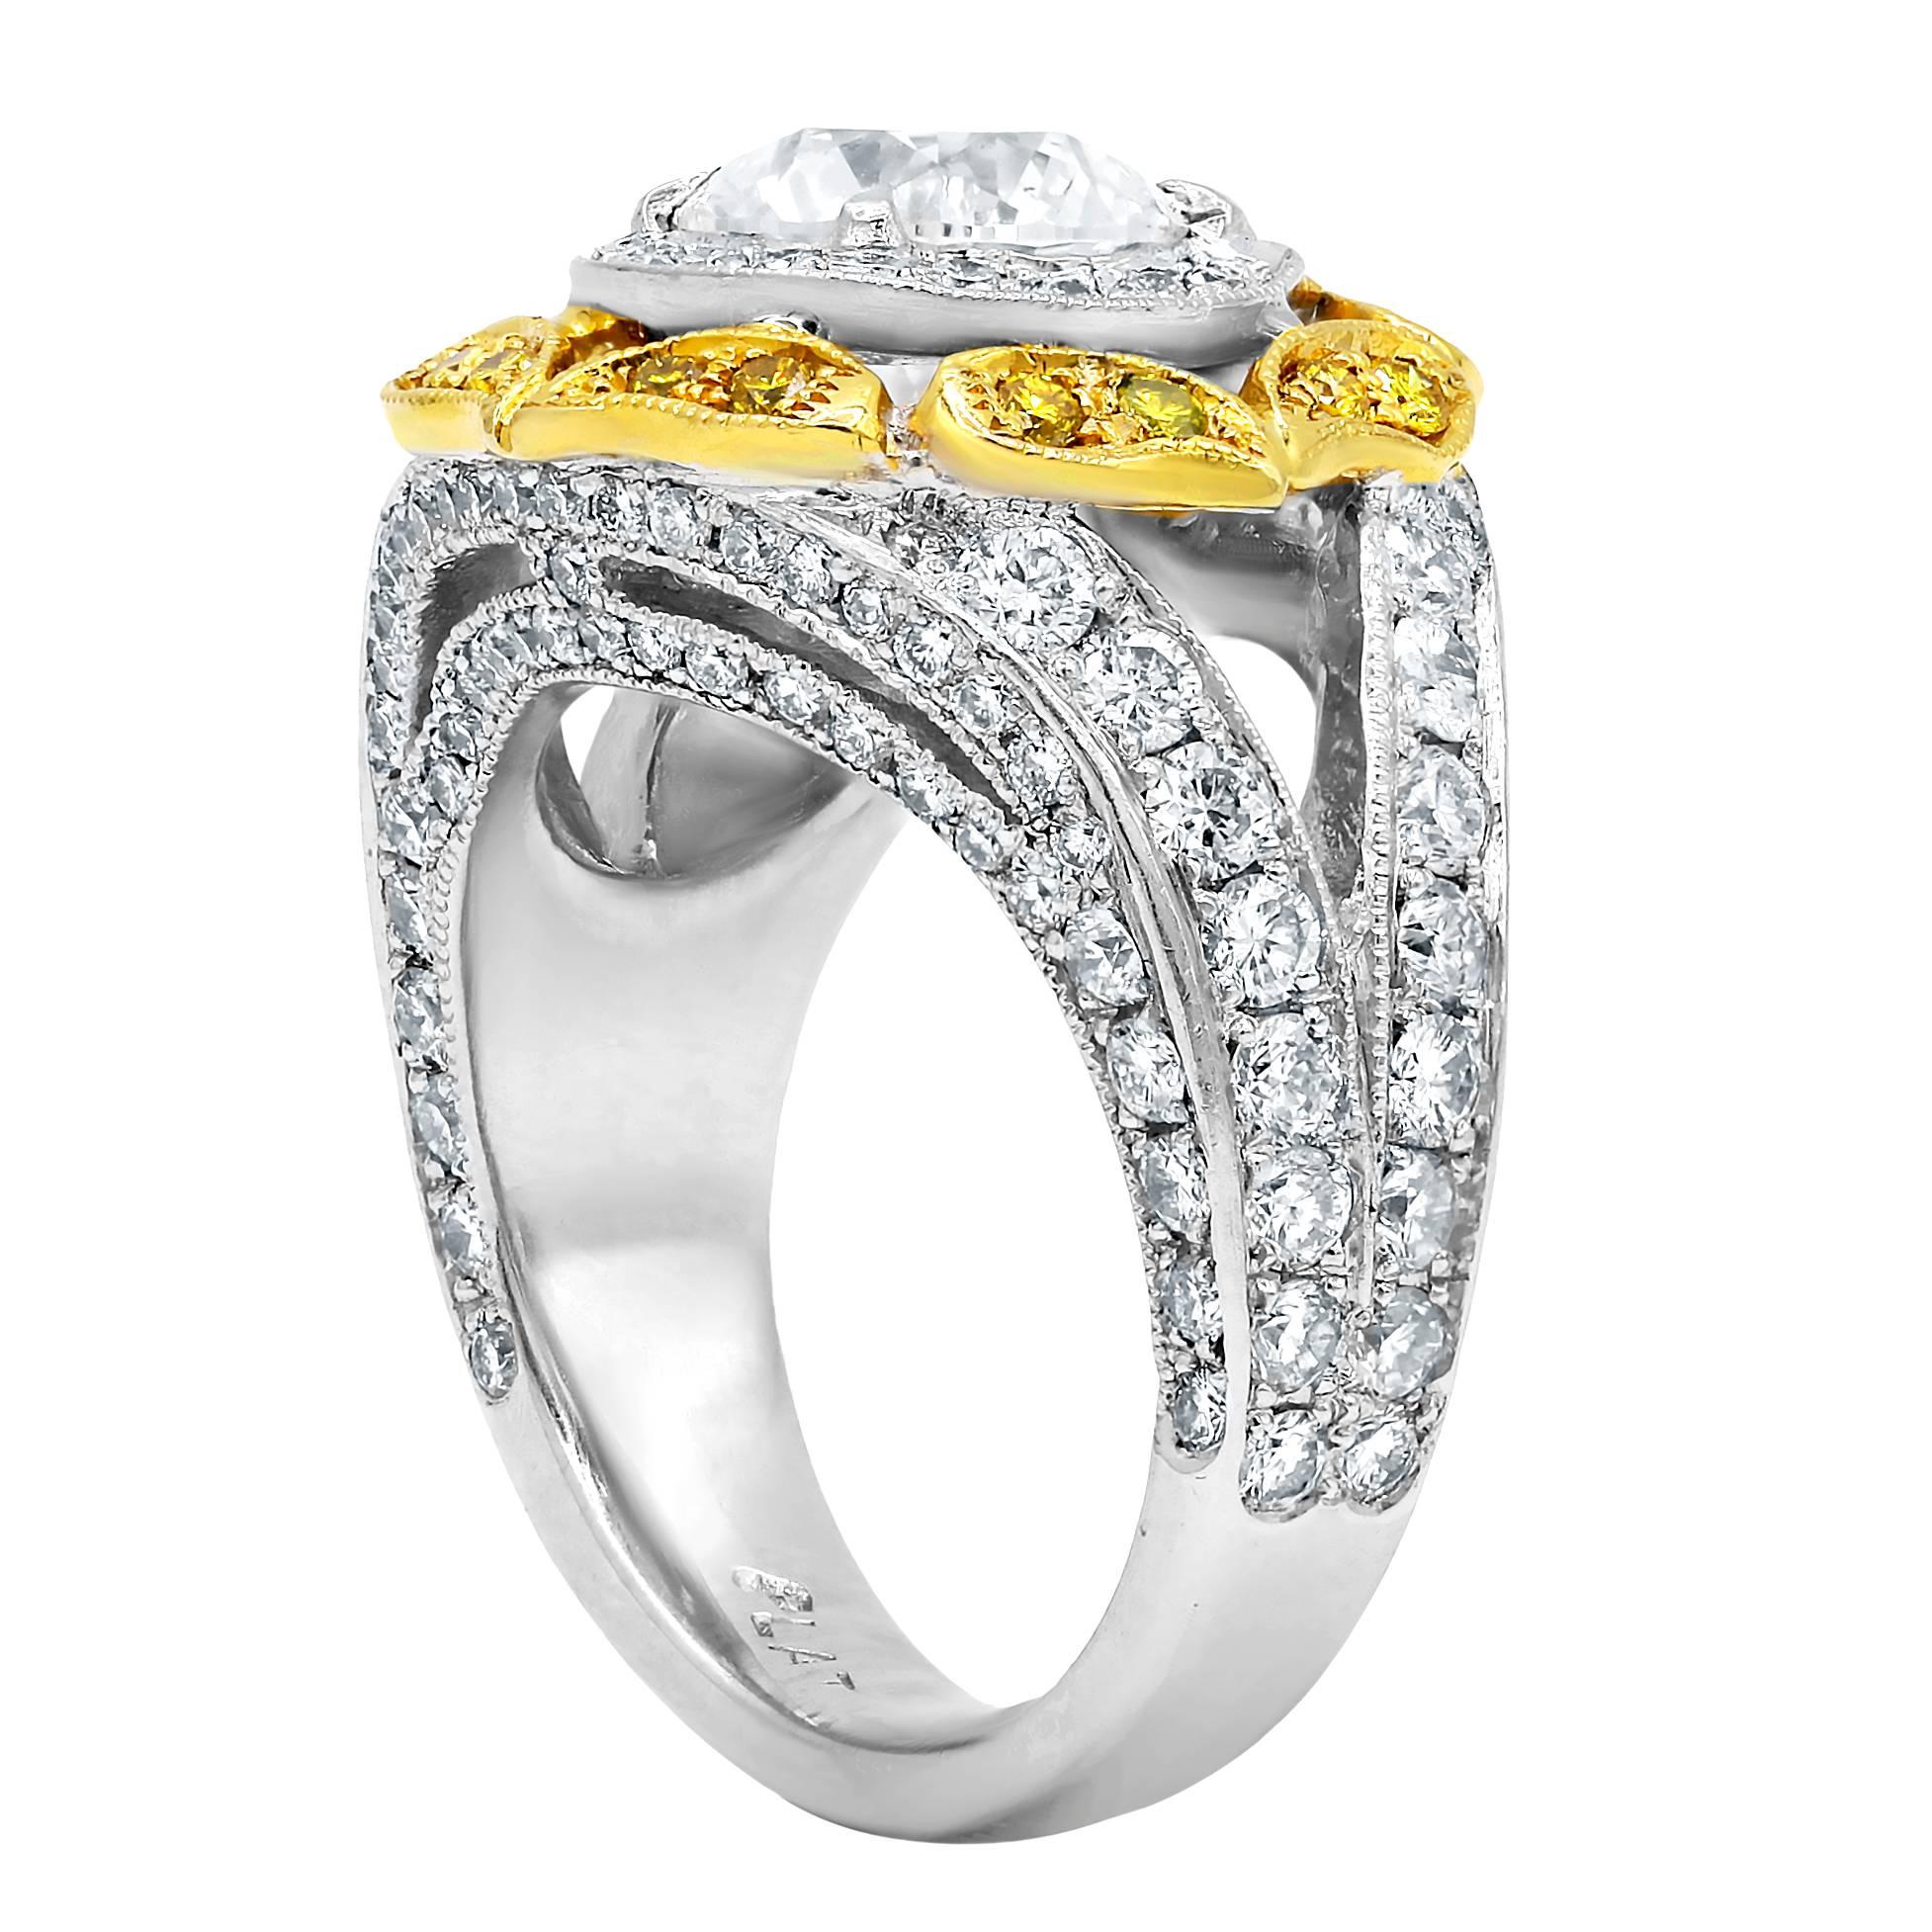 One of a kind EGL certified diamond engagement ring with round brilliant cut diamond in the center,weighing 2.00 carats G color/Si1 clarity set in custom made halo mounting and accented by 2.35 TCW white and yellow  round cut diamonds on the side